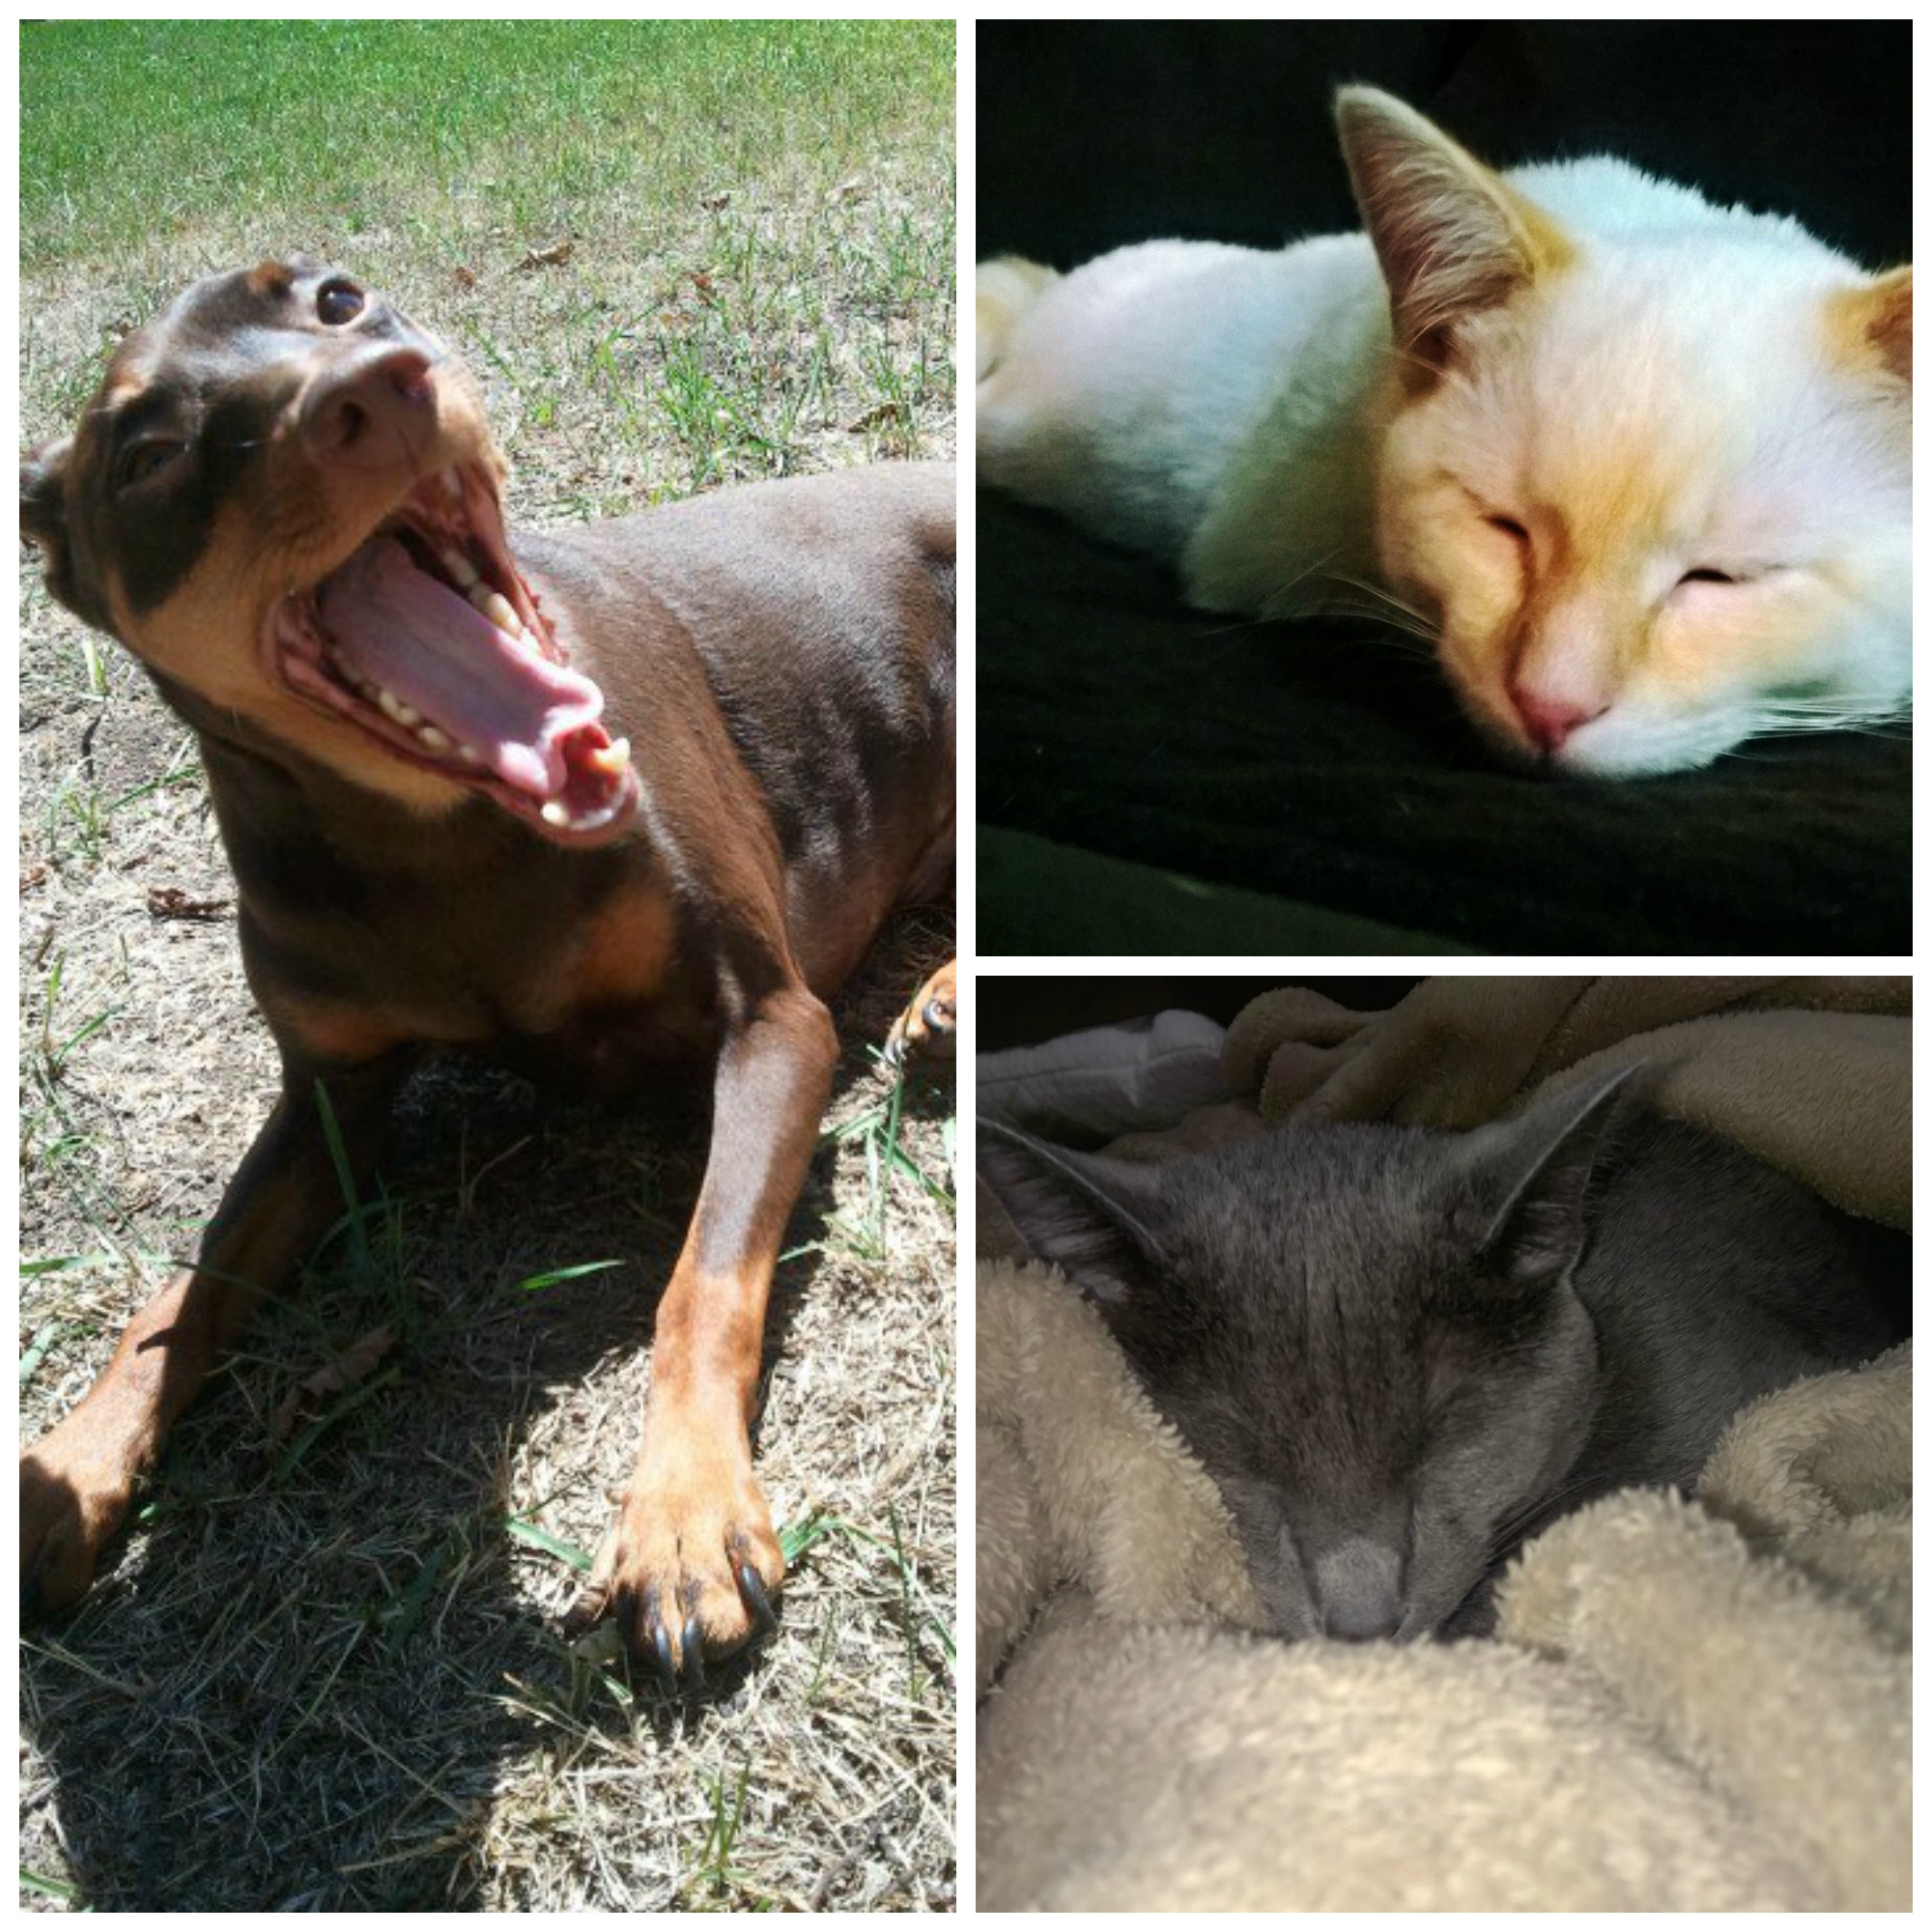 All three of my pets are wild, crazy, and act like a pack.